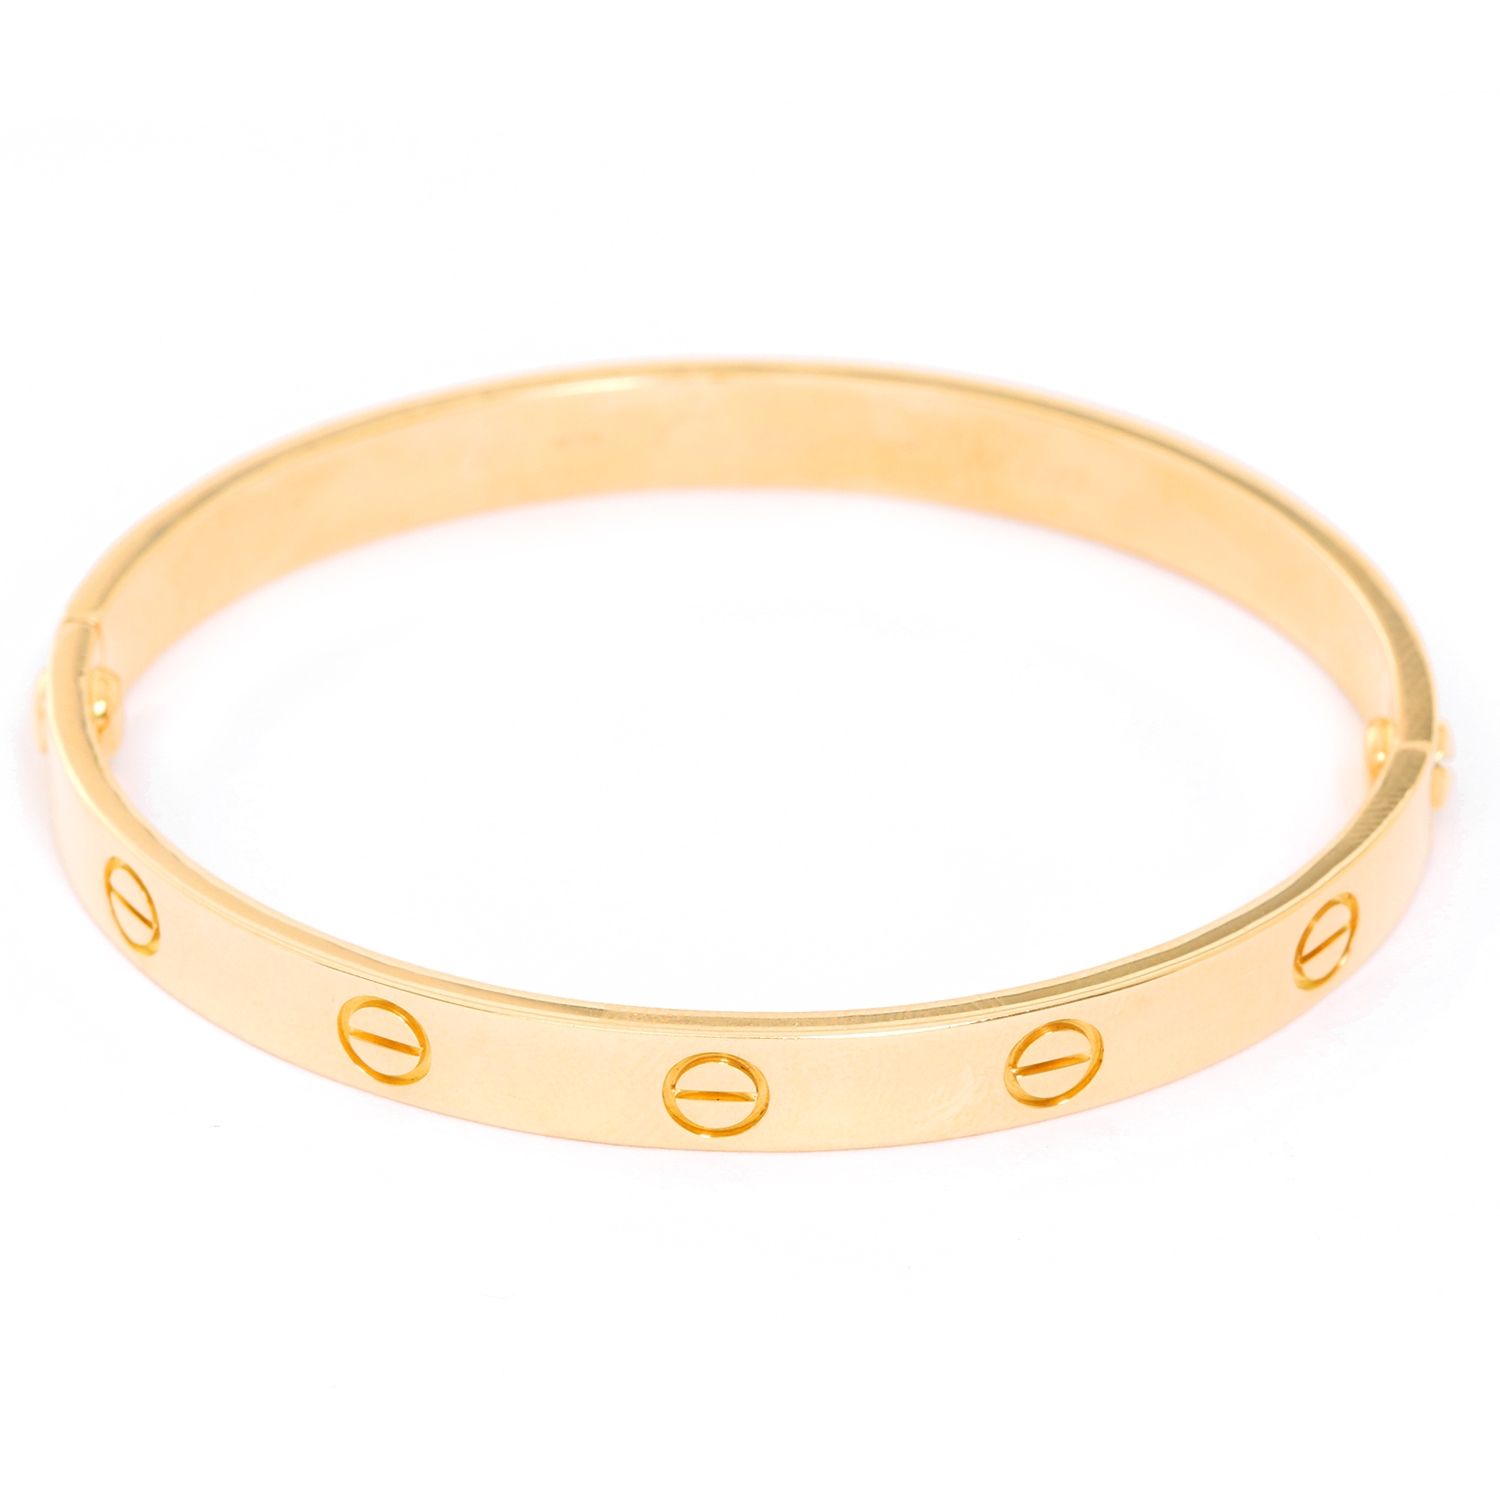 Cartier Love Bracelet 18k Yellow Gold Size 17 With Screwdriver